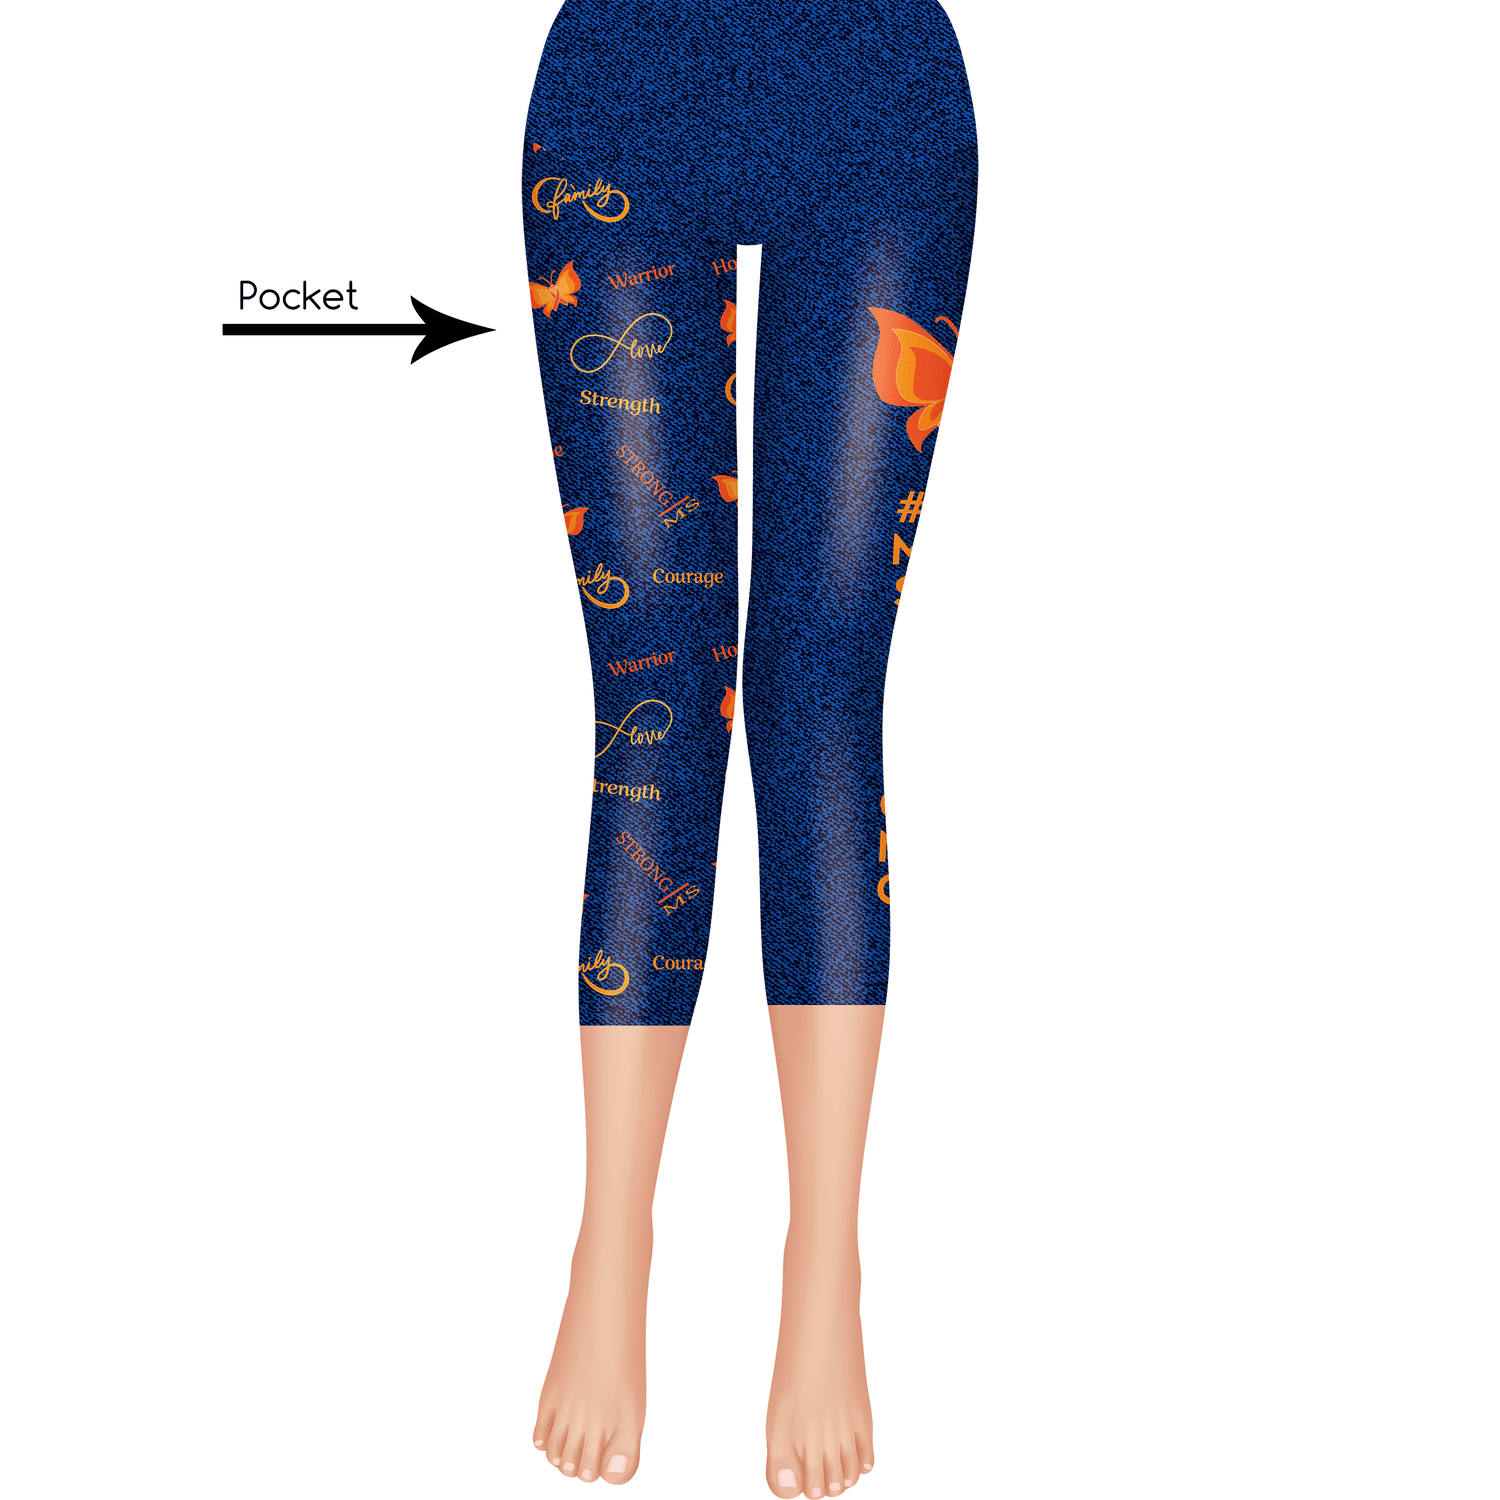 MS Strong Awareness Capri or Shorts Leggings with Pockets